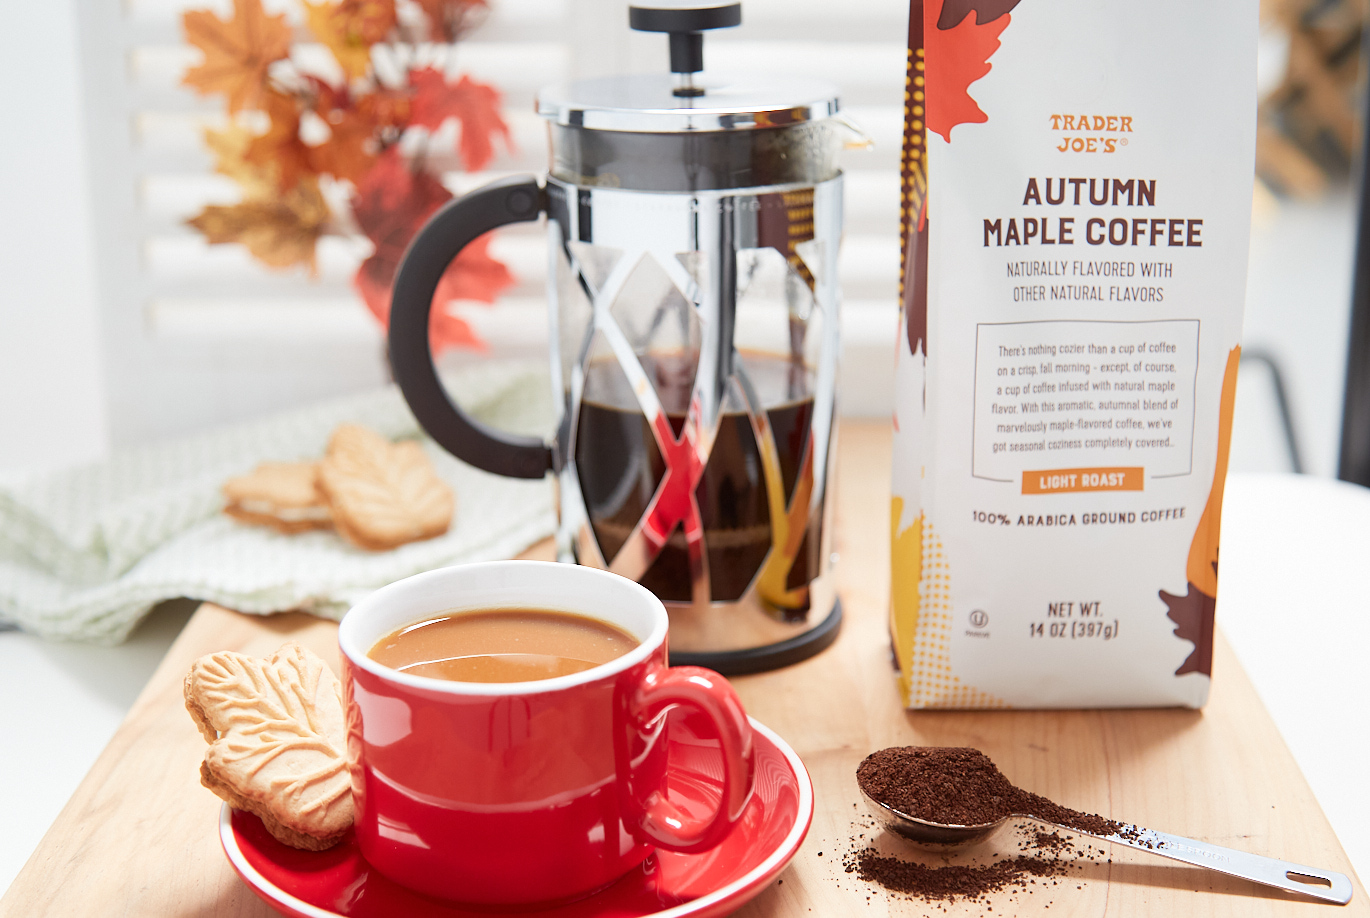 https://www.traderjoes.com/content/dam/trjo/context-images/66148-autumn-maple-coffee-pdp.jpg